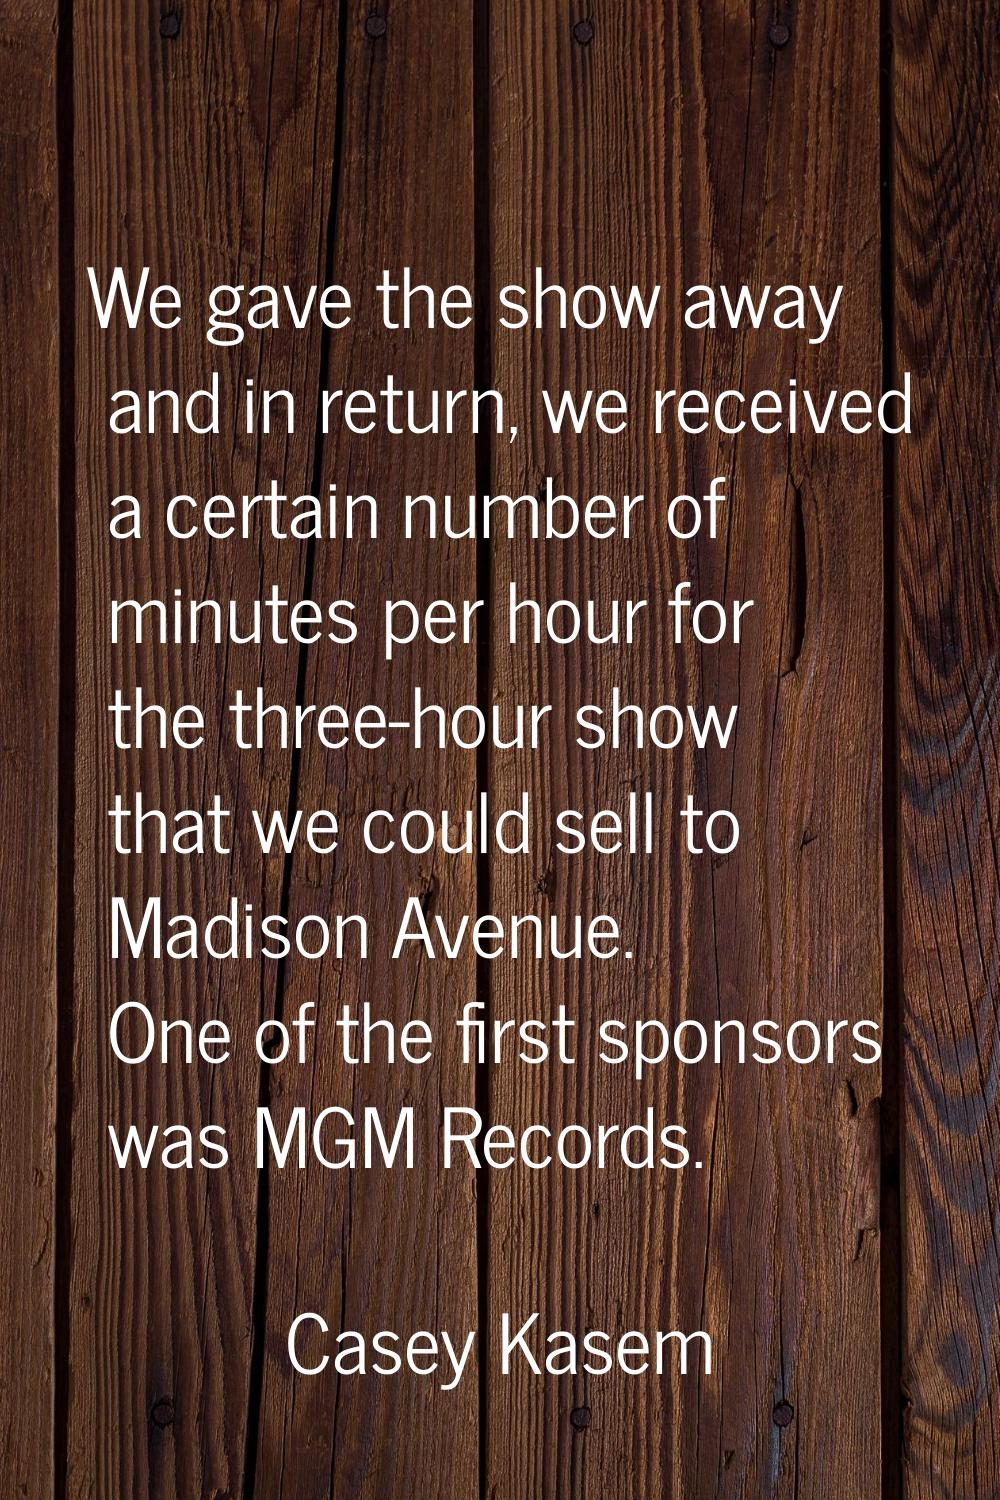 We gave the show away and in return, we received a certain number of minutes per hour for the three